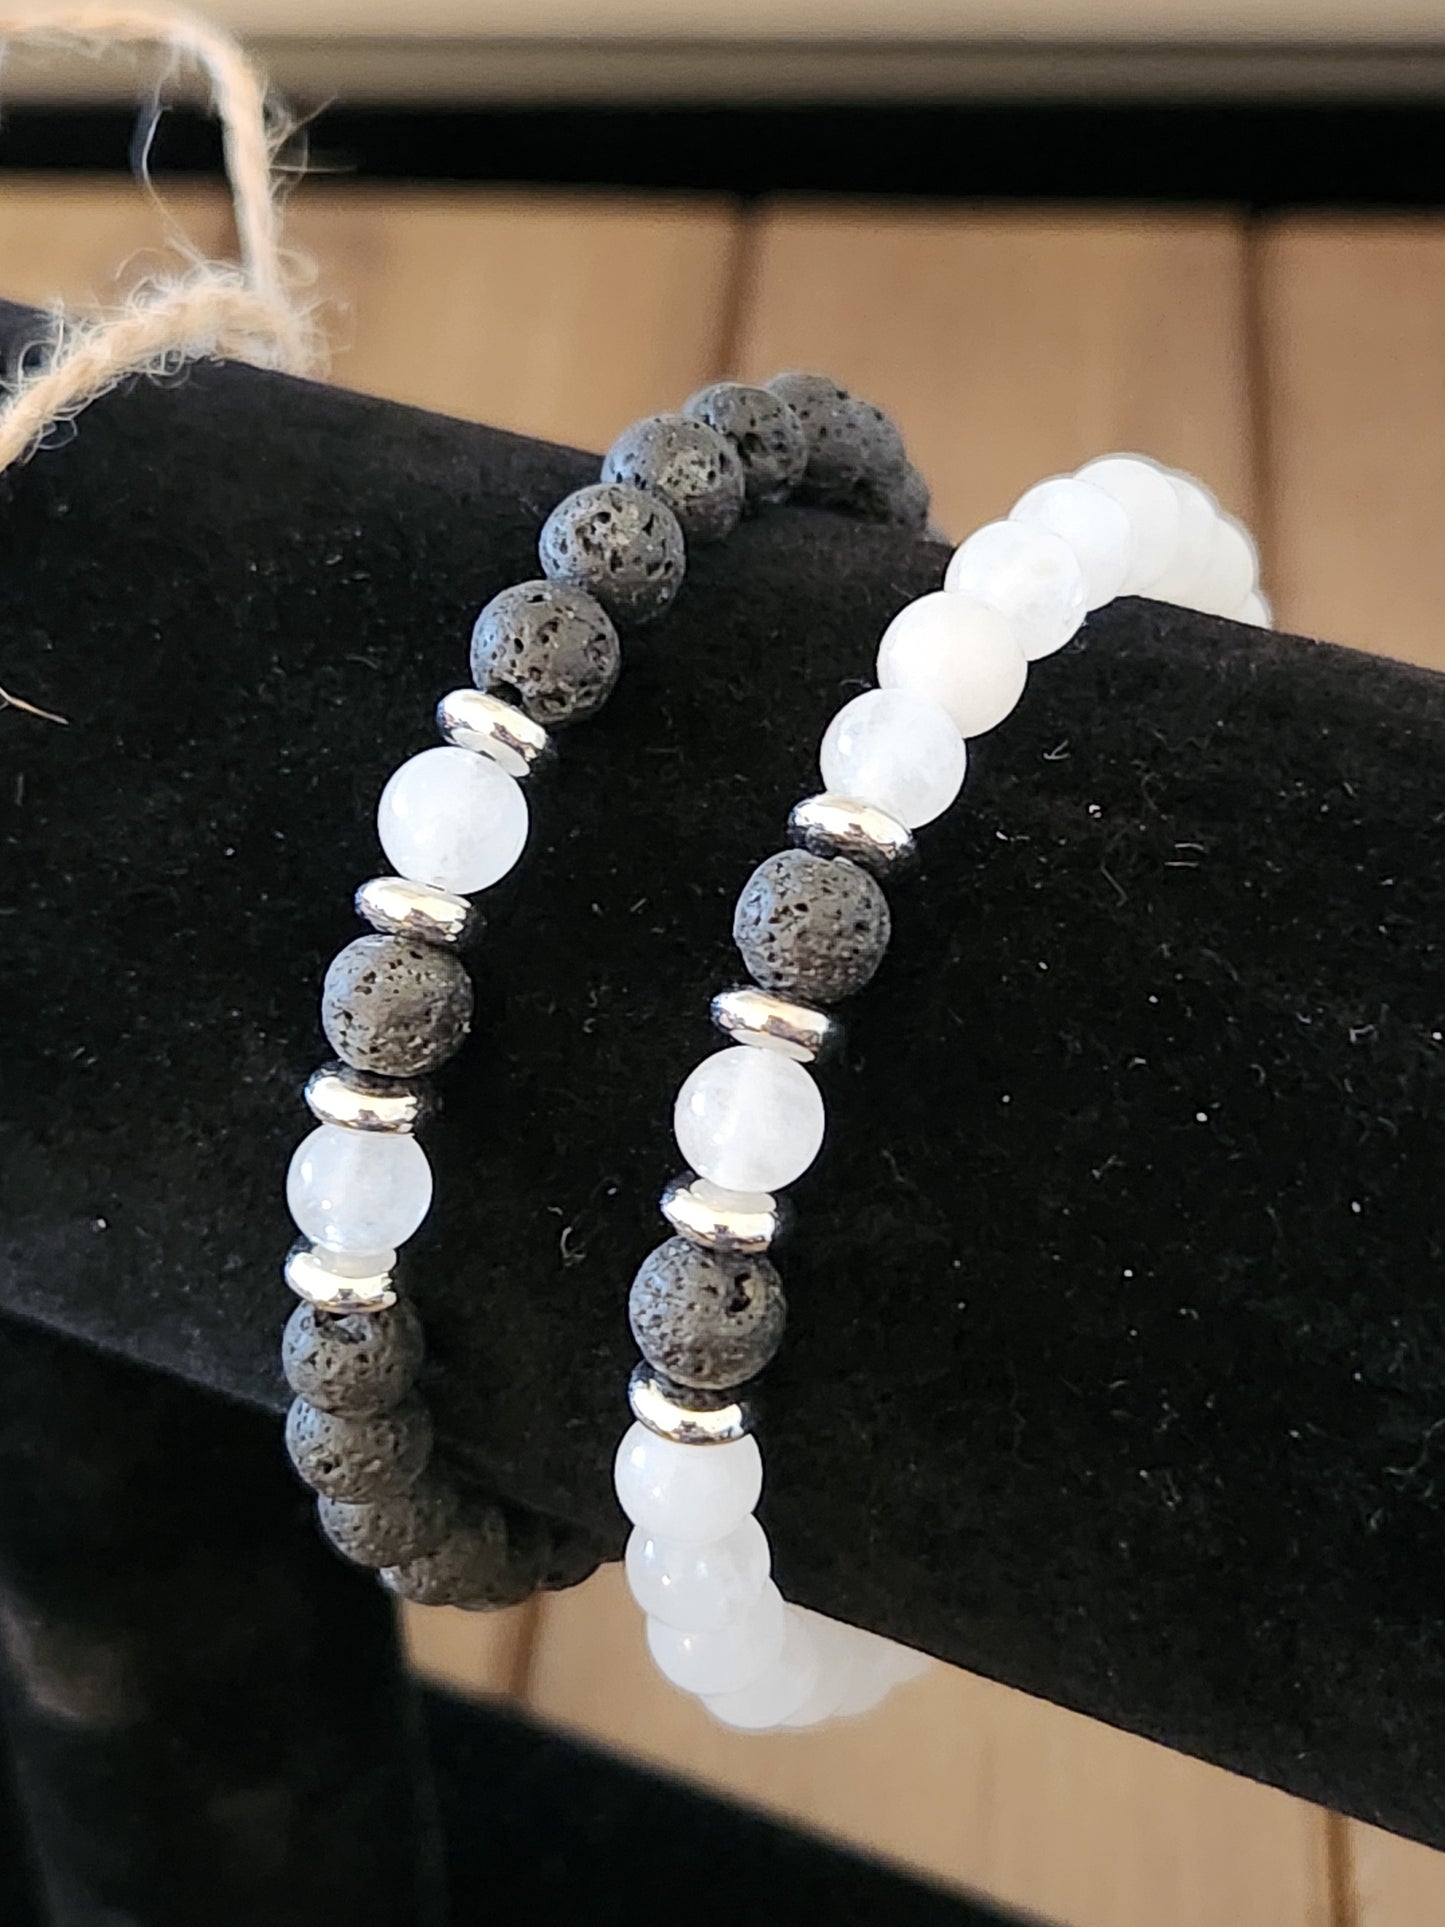 Black Volcanic Lava Stone and White Jade Stone Bracelet Set - courage - stability - calming - direction - peace